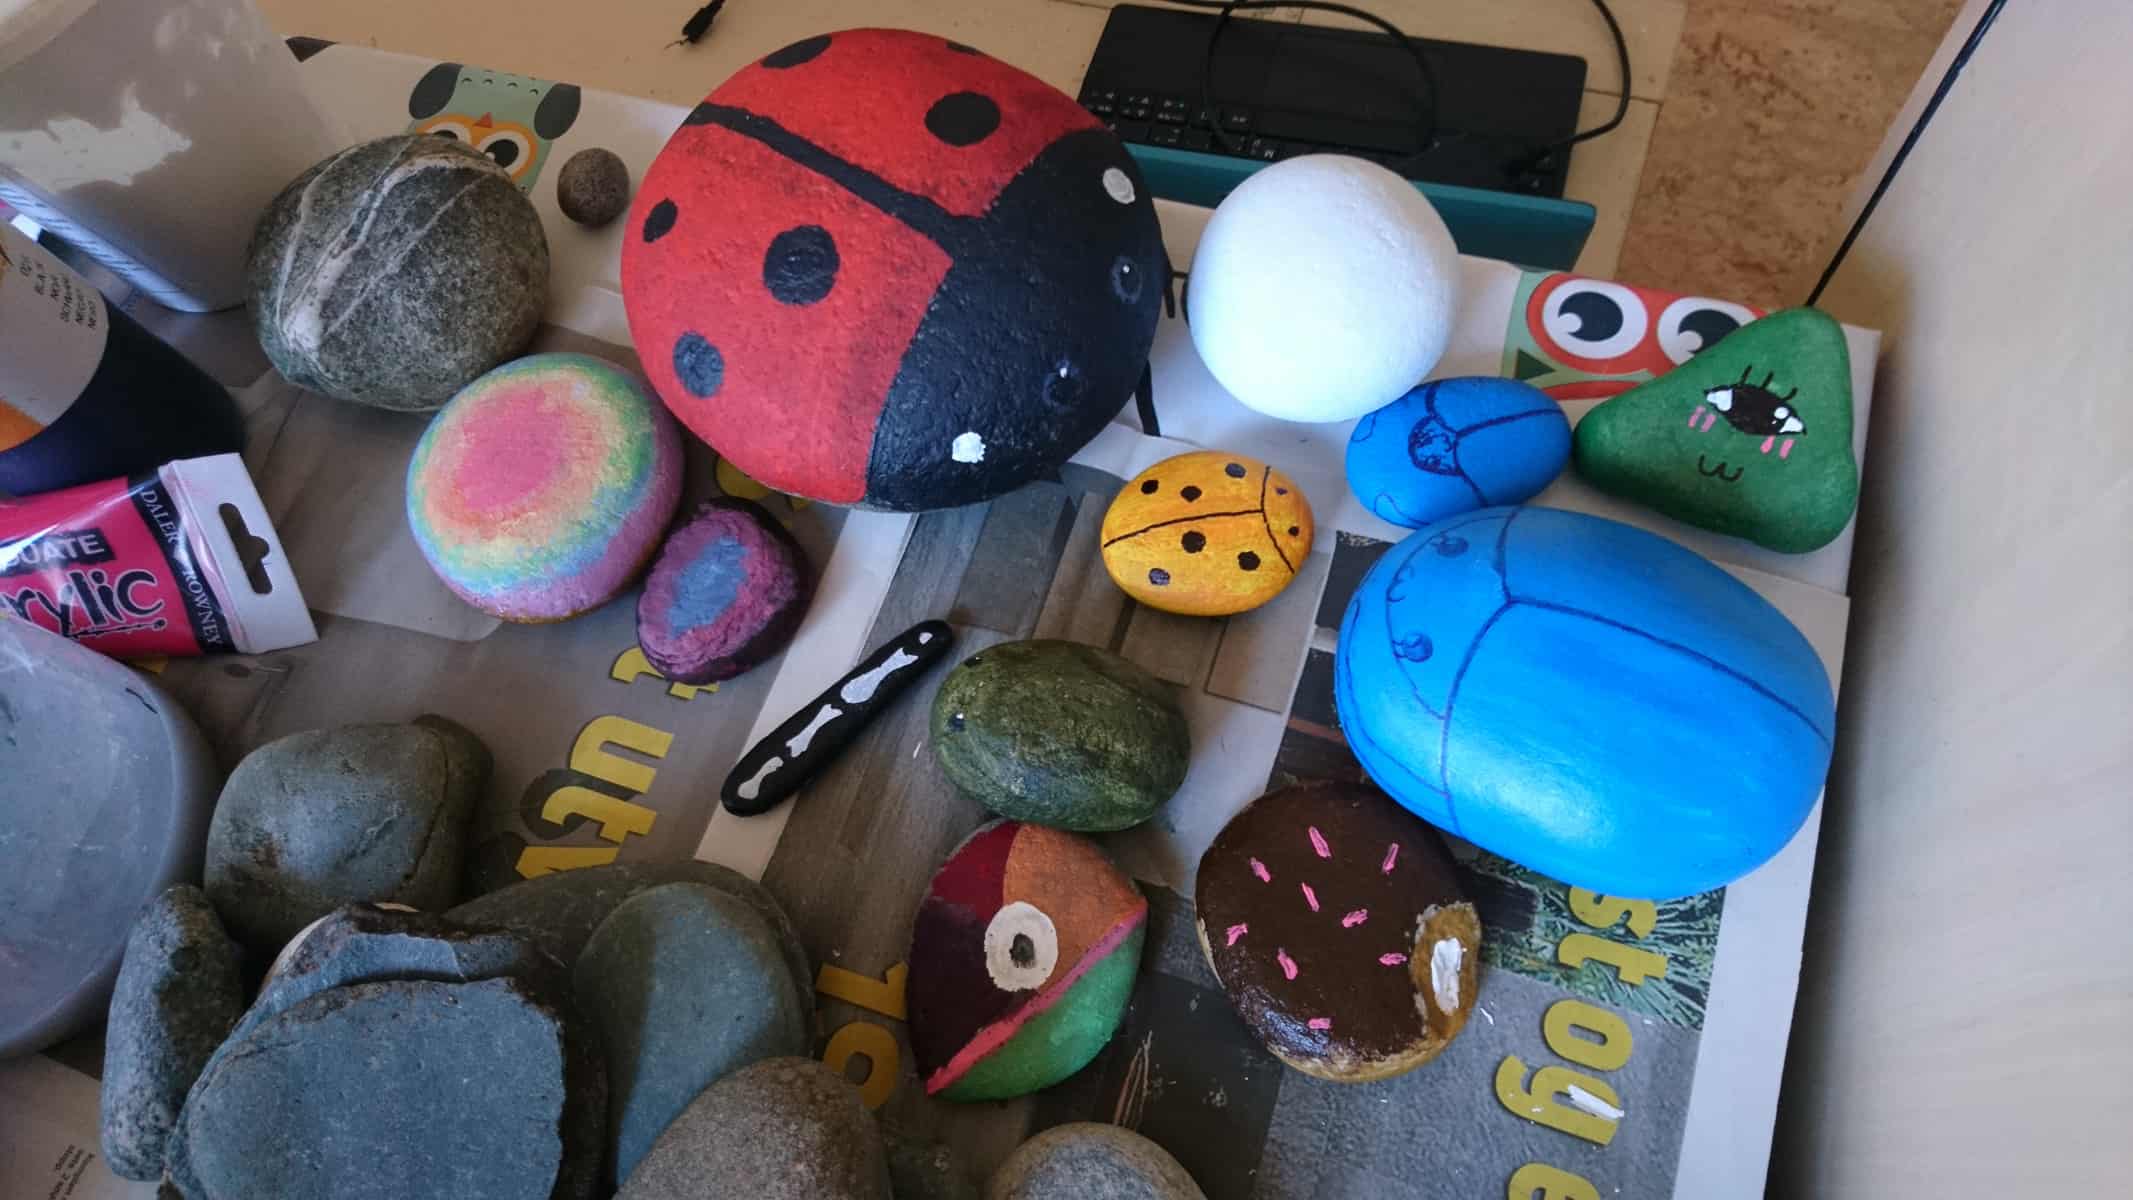 Painting stones for the garden with my daughter